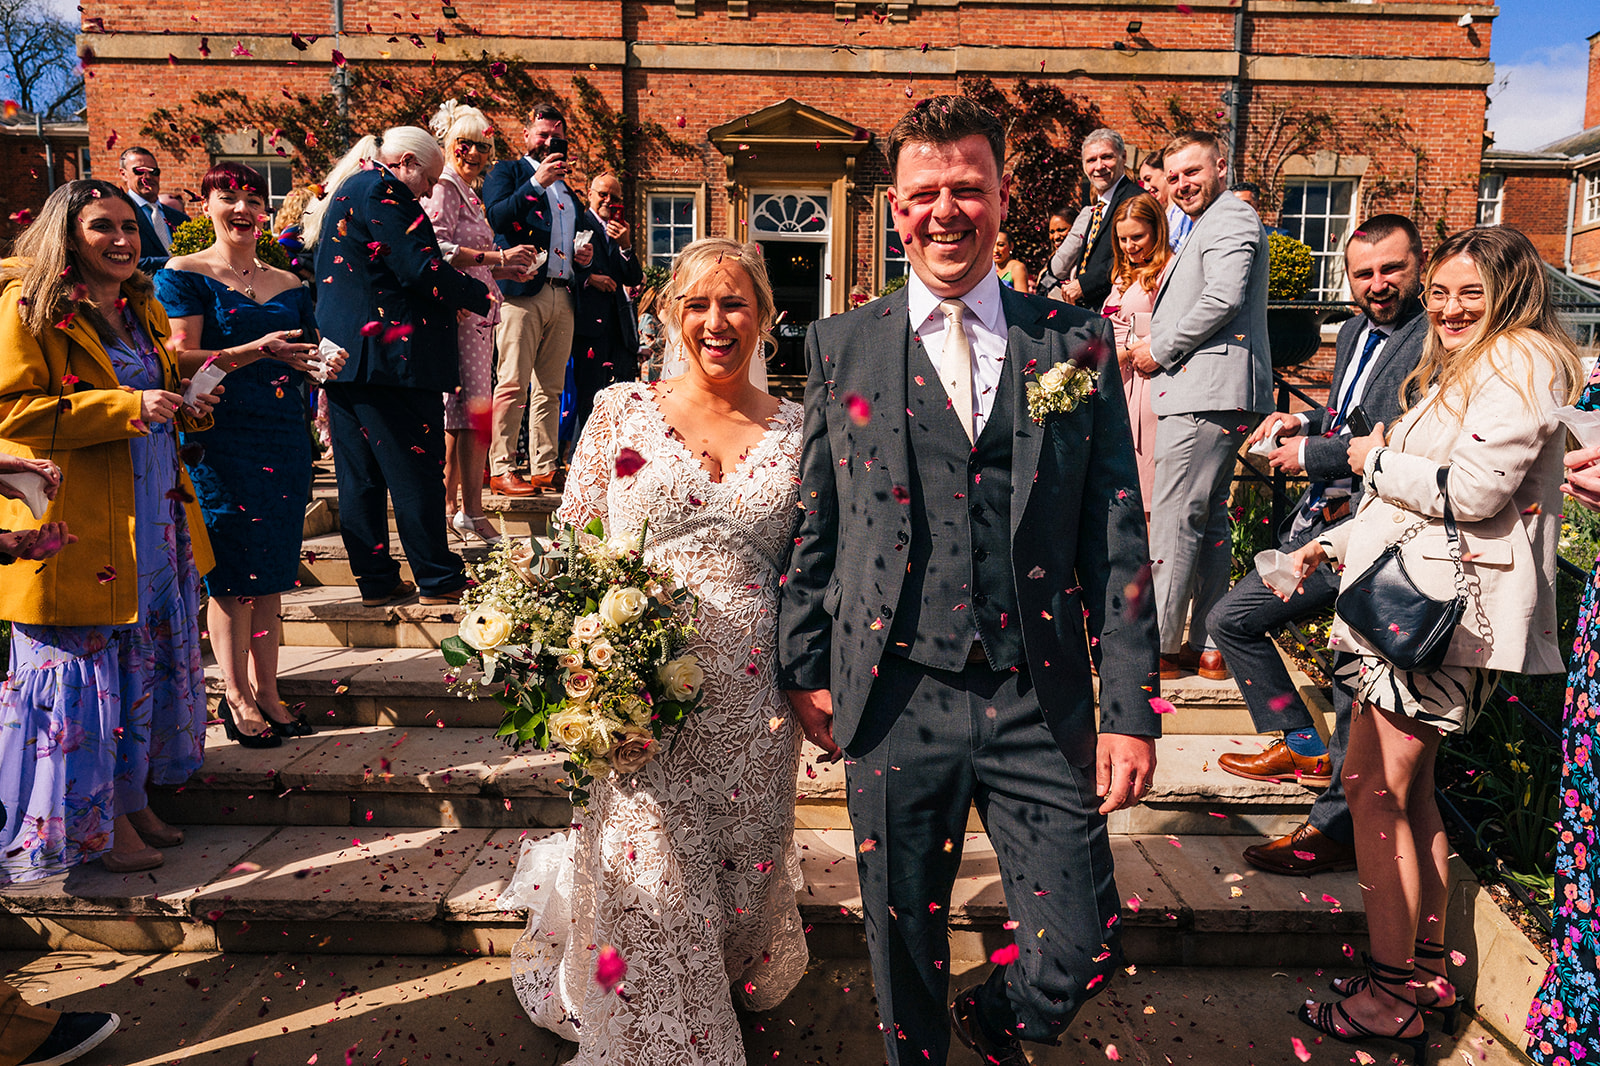 The bride and groom get covered in confetti at Norwood Park